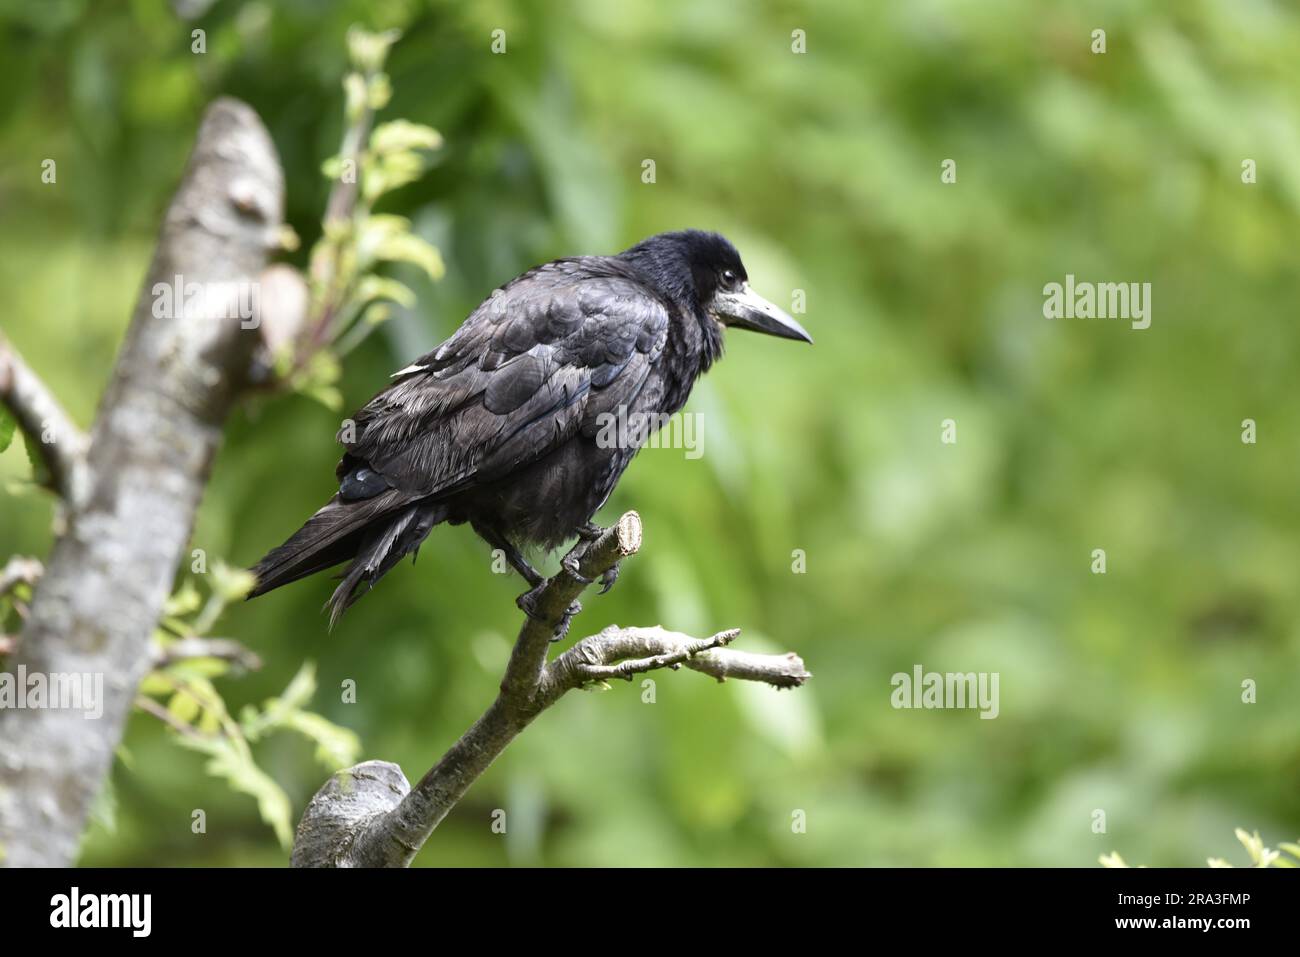 Foreground Image of a Rook (Corvus frugilegus) Perched in Right-Profile at Eye Level, against a Blurred Green Background on the Isle of Man, UK Stock Photo